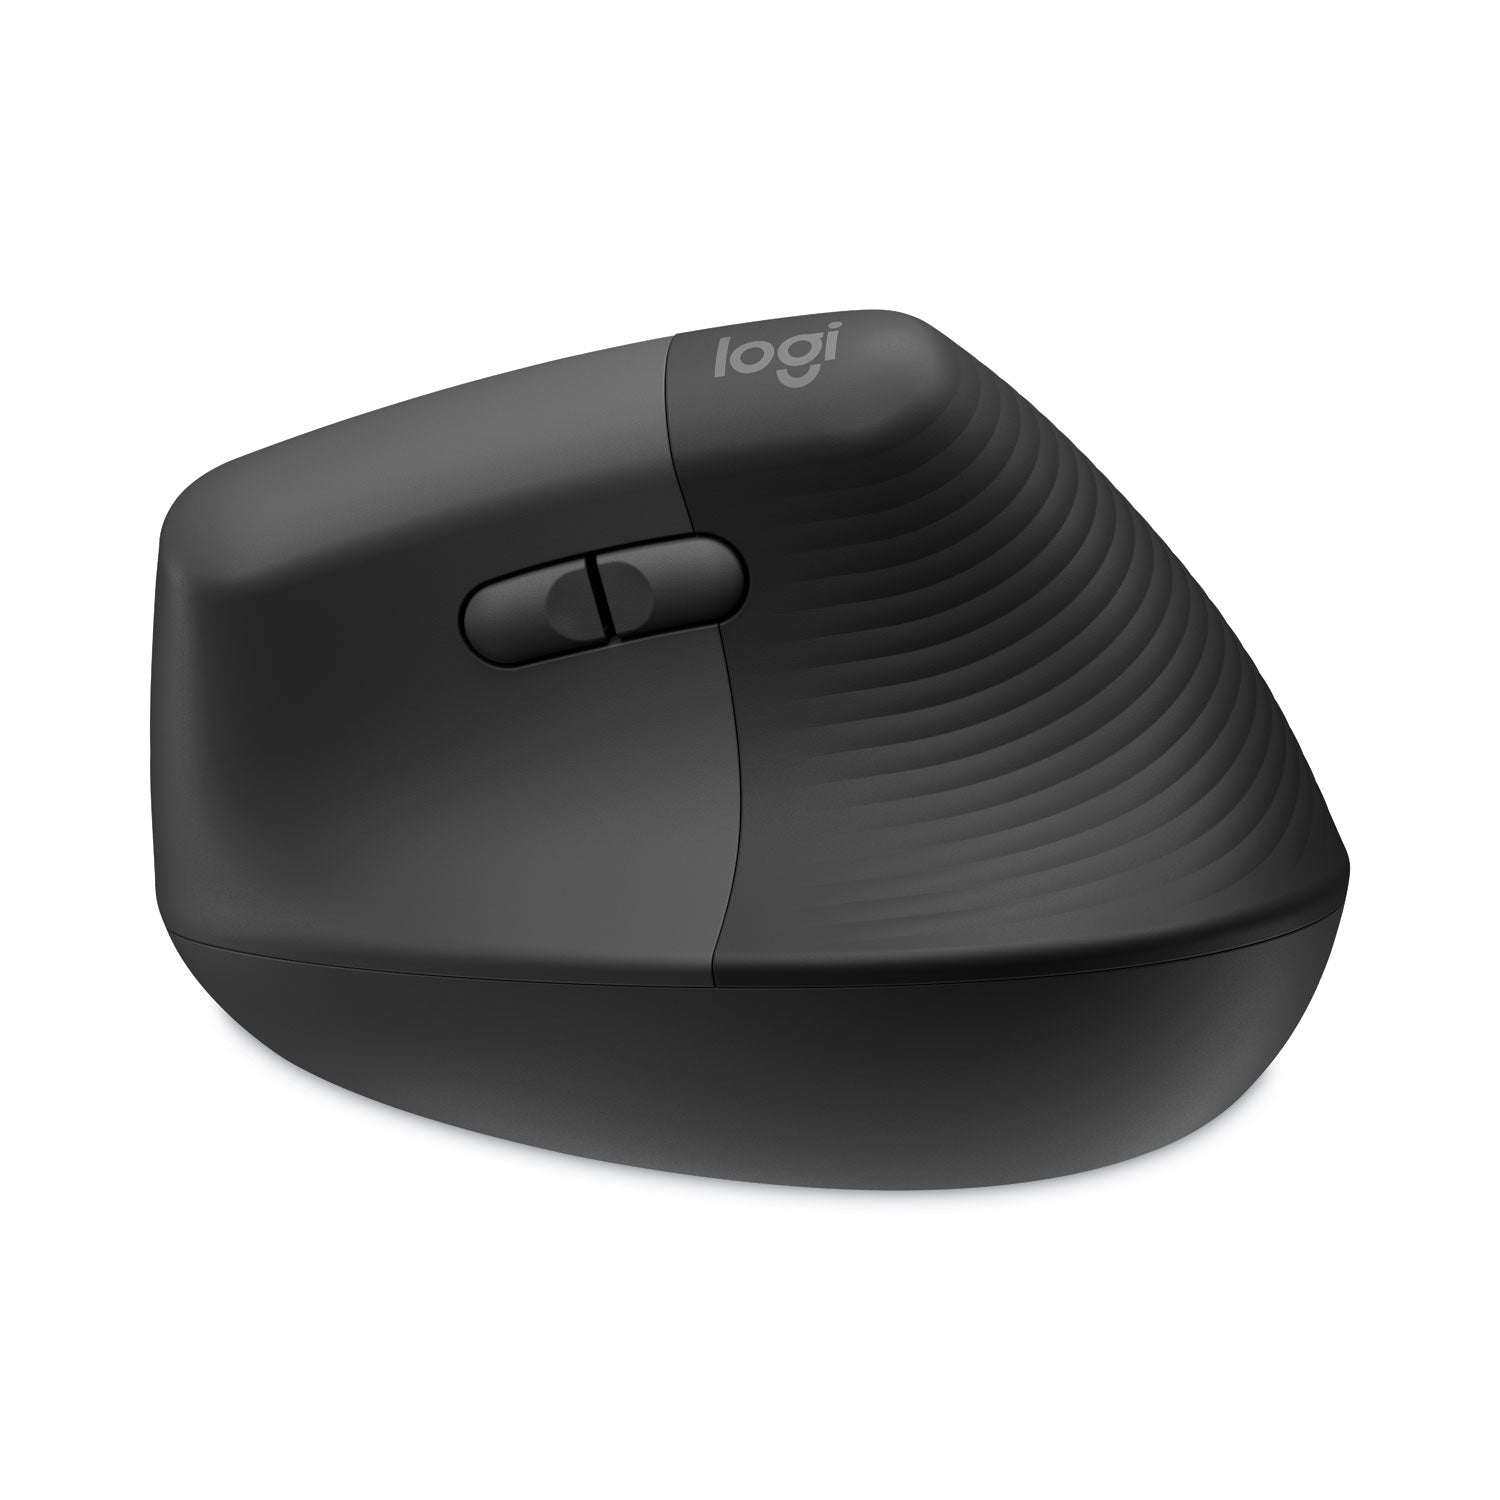 lift-vertical-ergonomic-mouse-24-ghz-frequency-32-ft-wireless-range-right-hand-use-graphite_log910006466 - 1